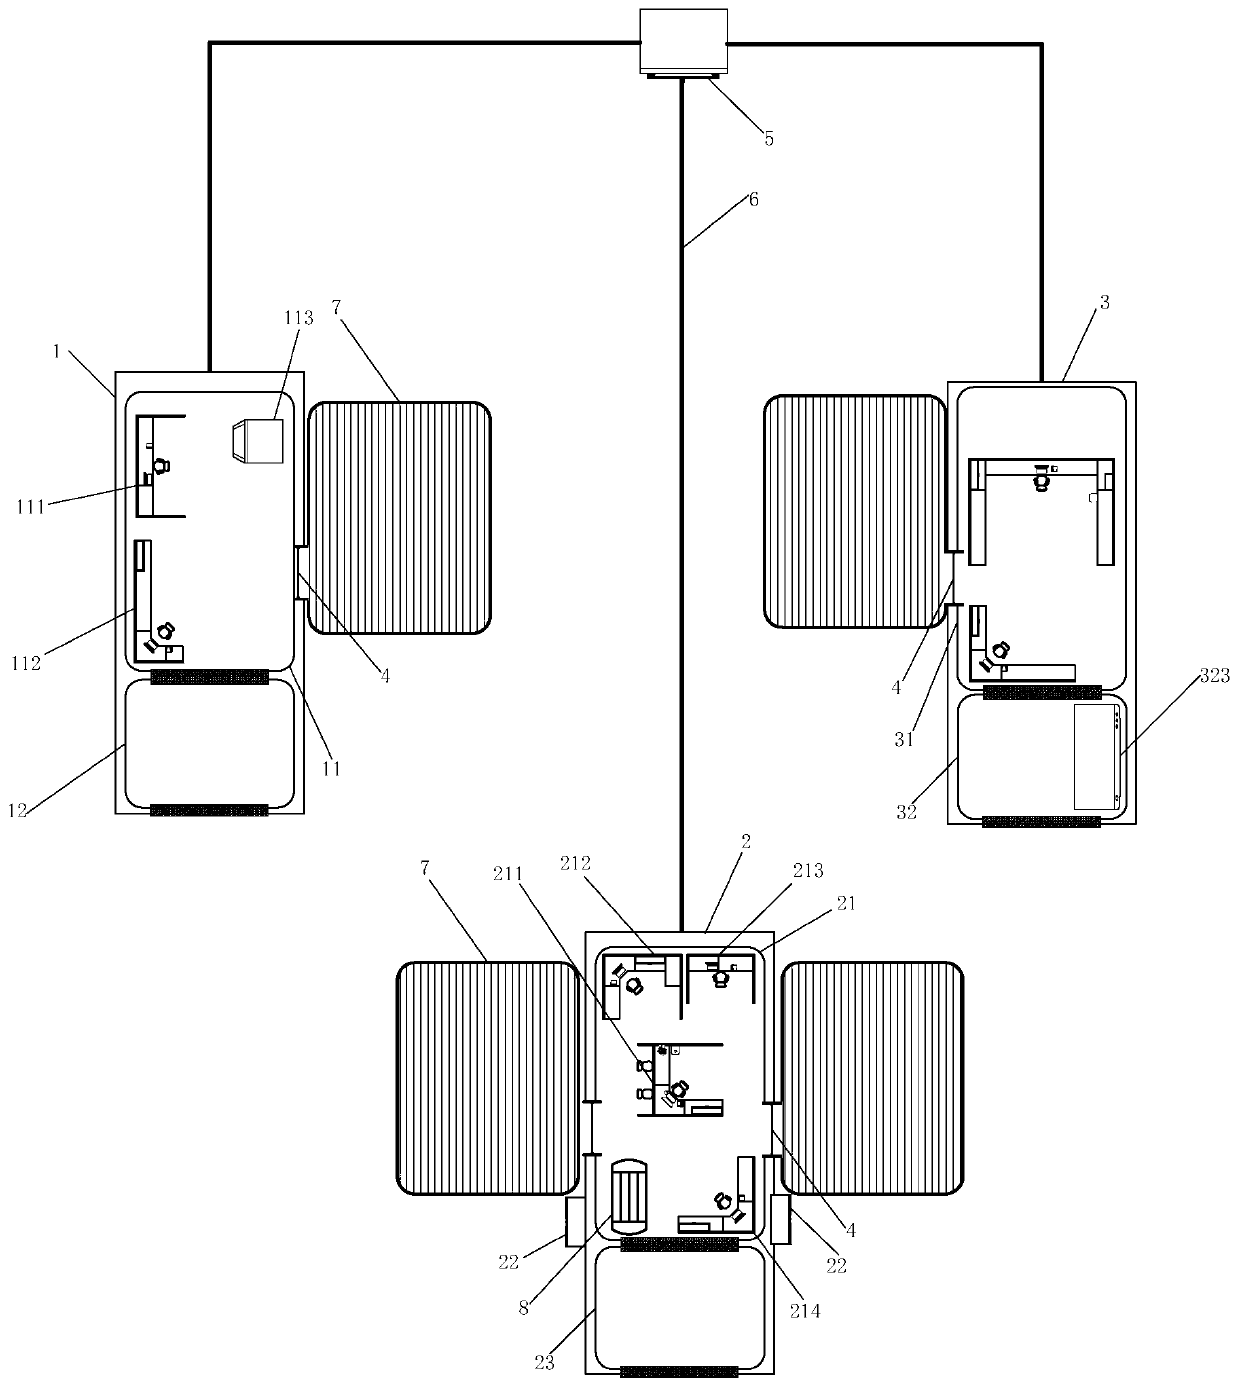 Movable pathogen nucleic acid testing laboratory system supporting rapid deployment